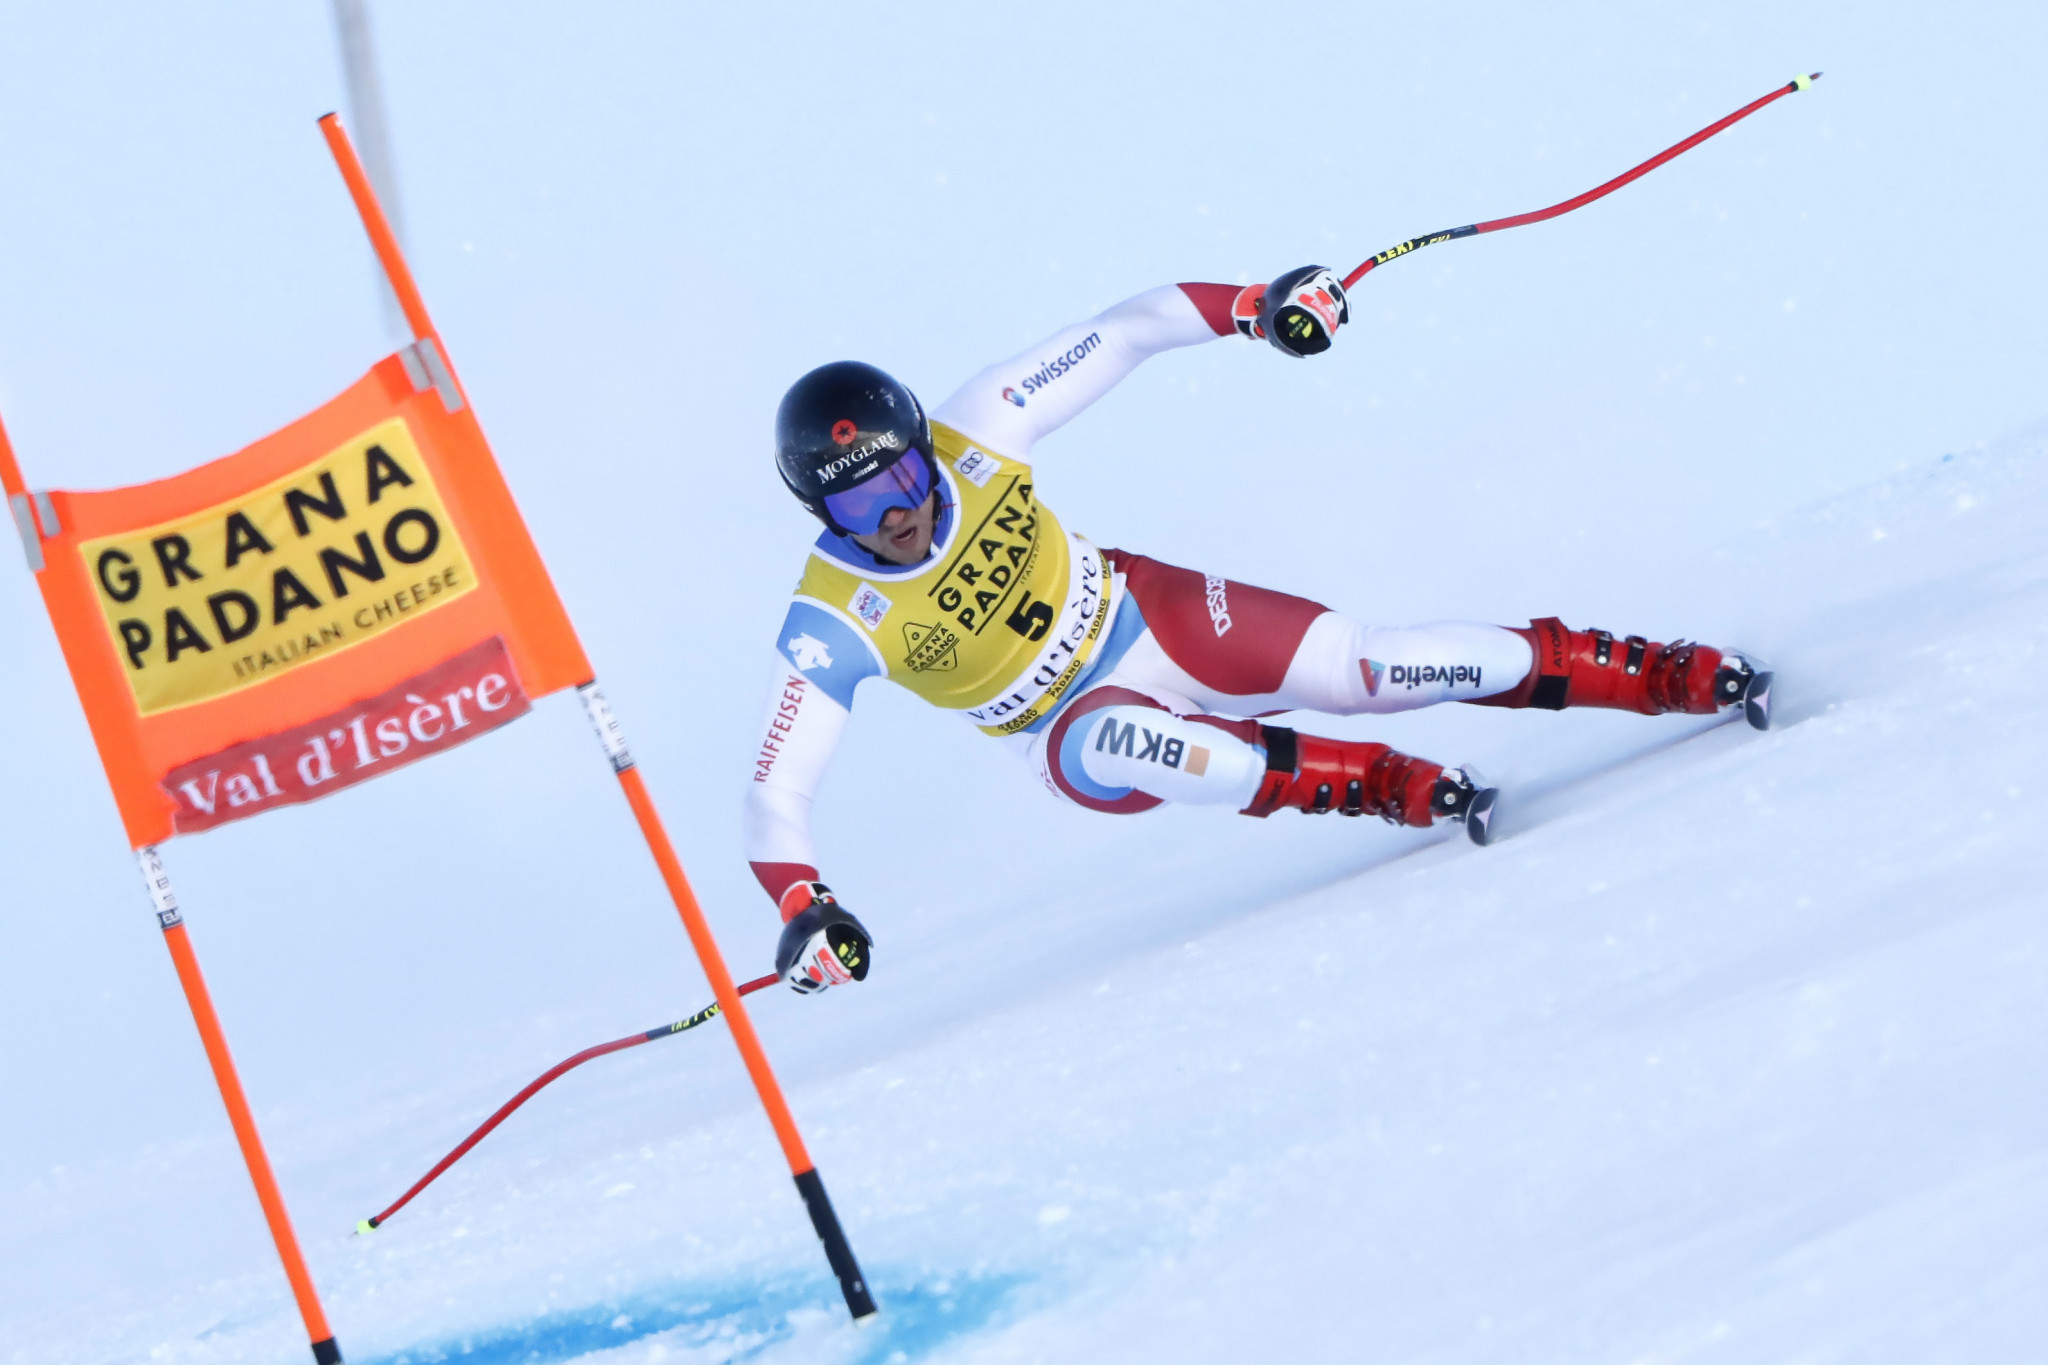 Mauro Caviezel will be among the favourites in the super-G event ©Getty Images